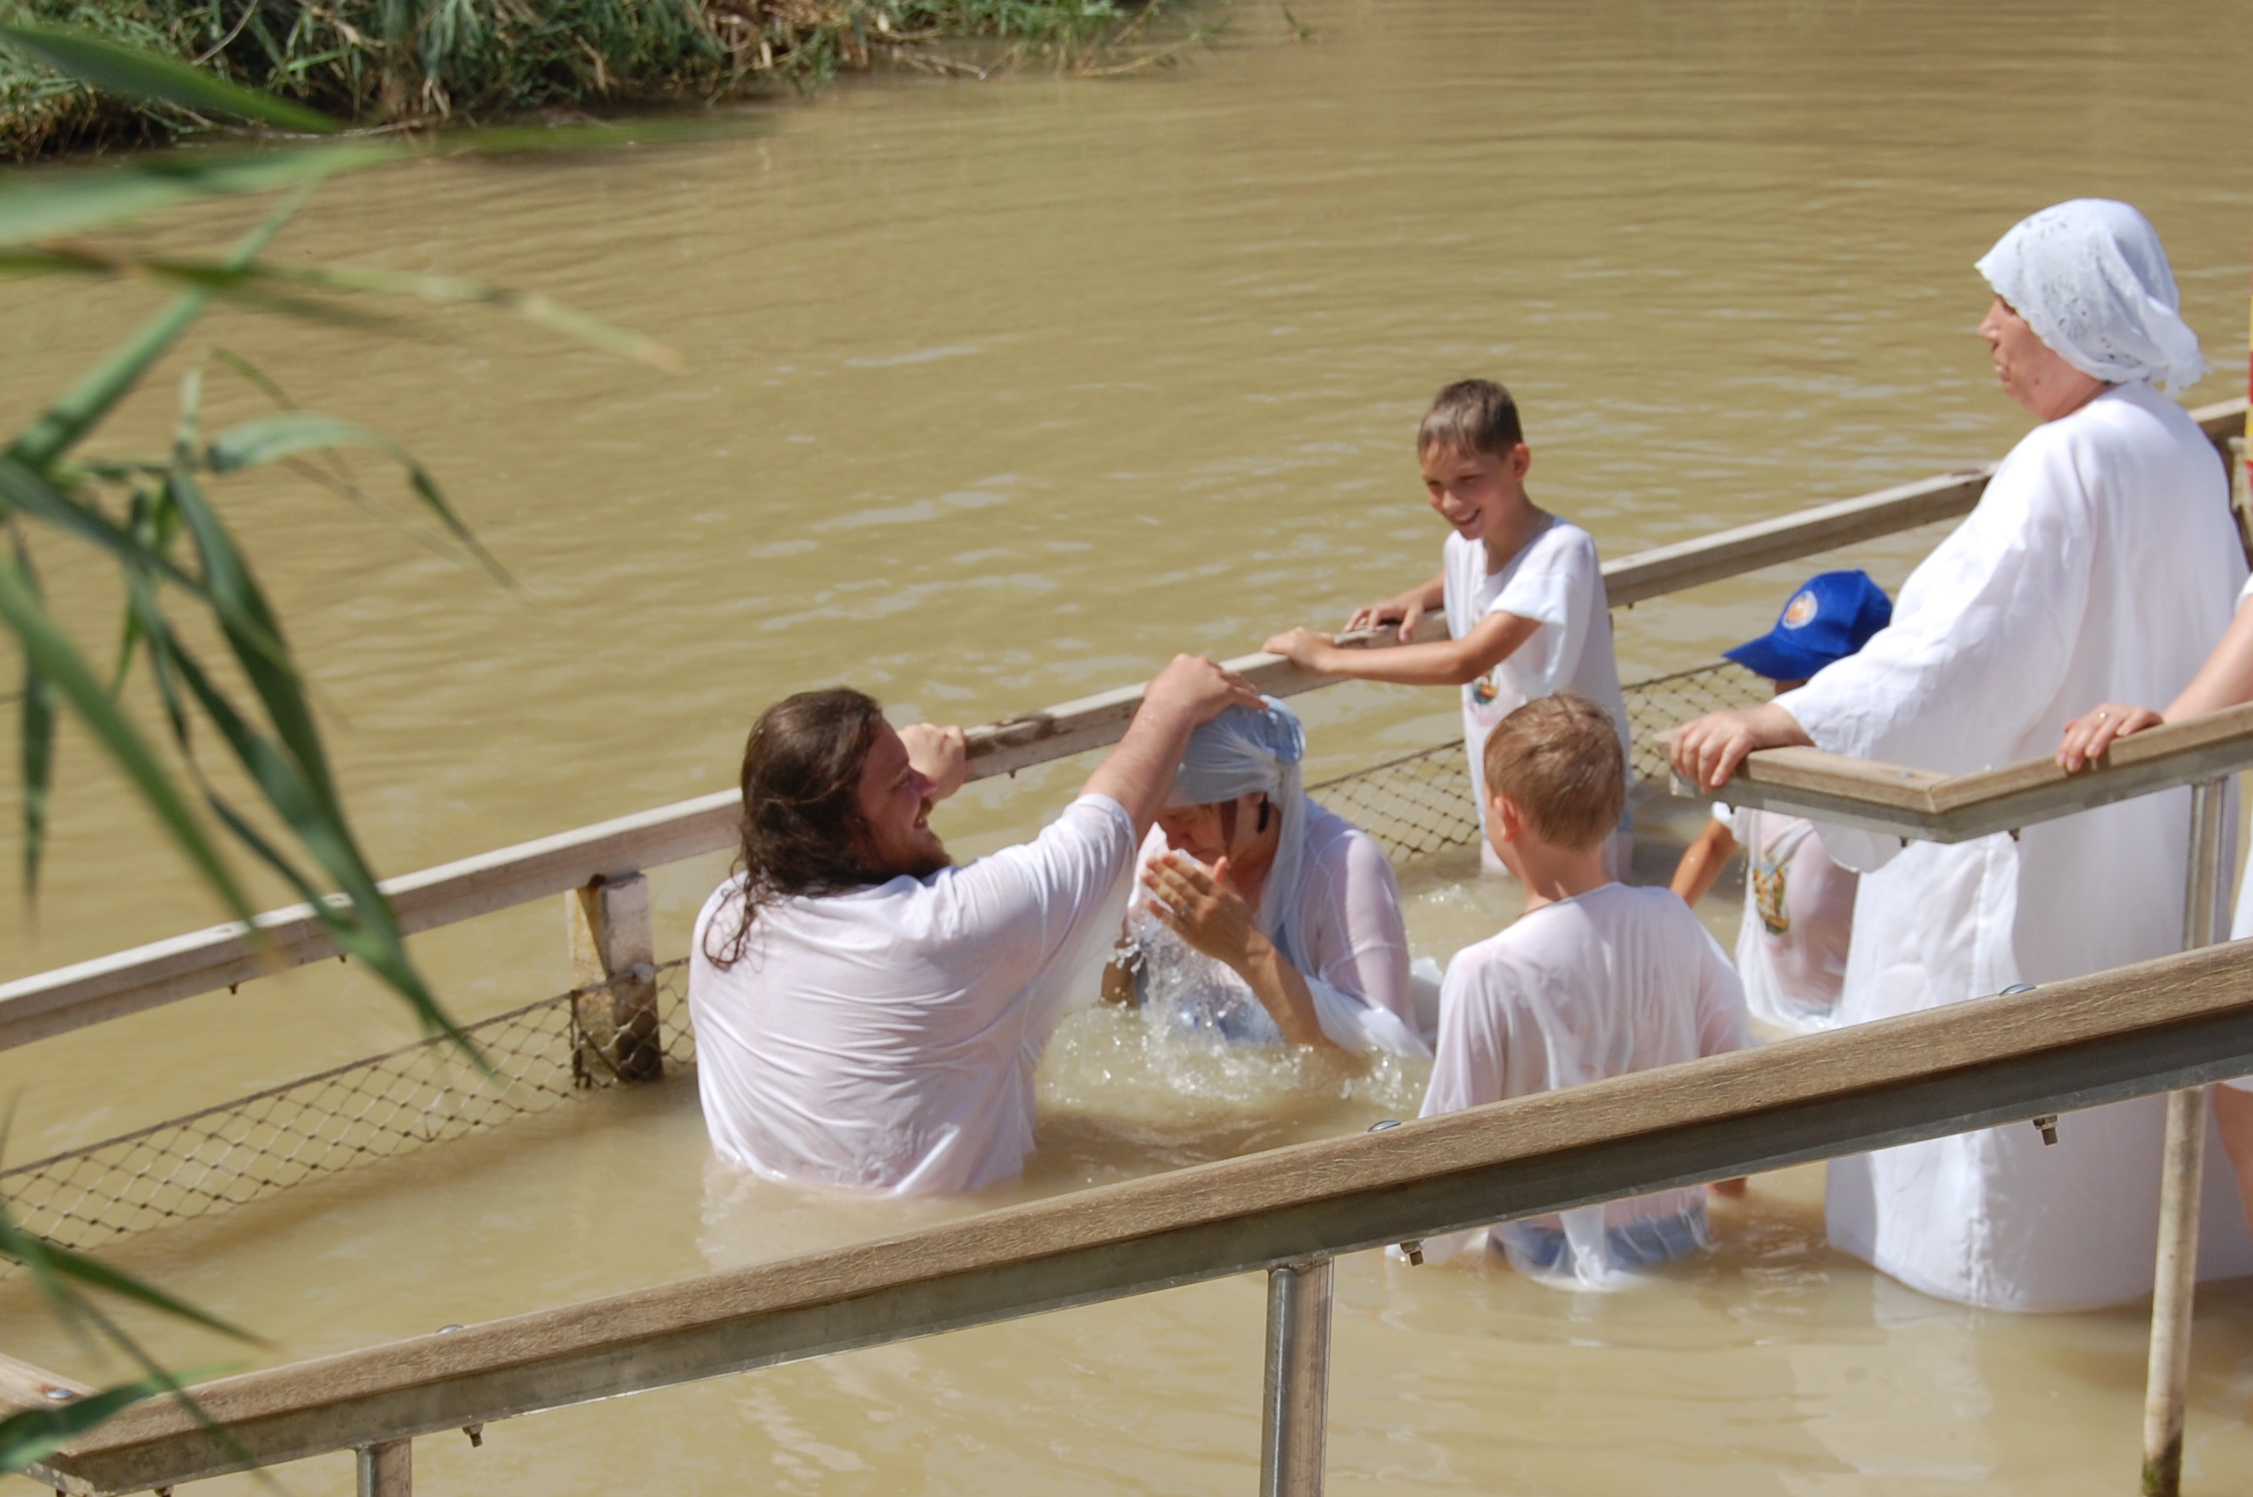 For centuries, baptisms have been performed in the Jordan River, considered holy by many religious communities.